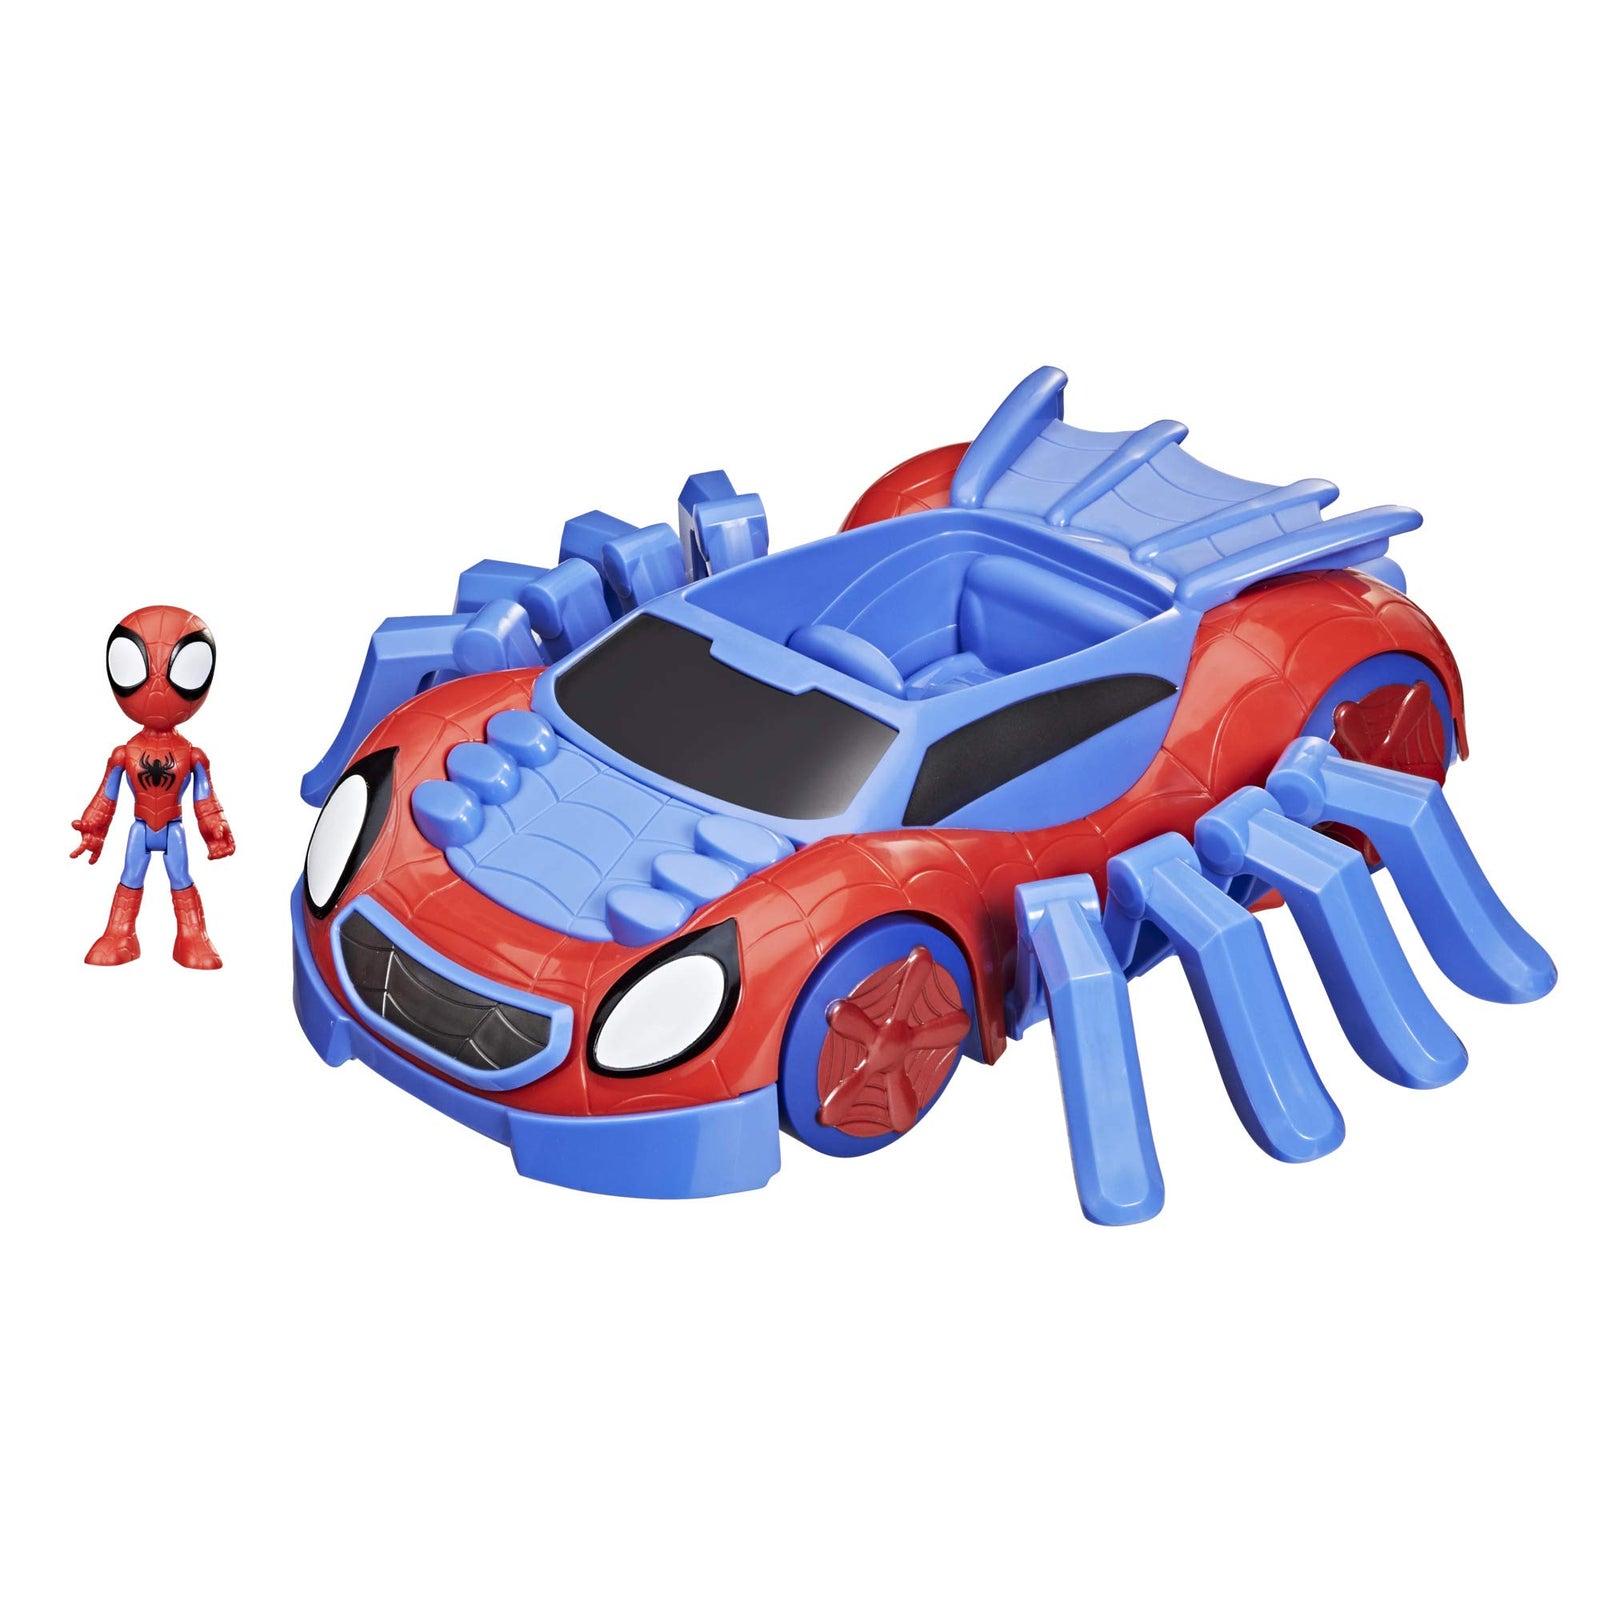 Marvel Spidey and His Amazing Friends Ultimate Web-Crawler, Spidey Stunner Feature and 4-Inch Spidey Figure, Ages 3 and Up, Frustration Free Packaging